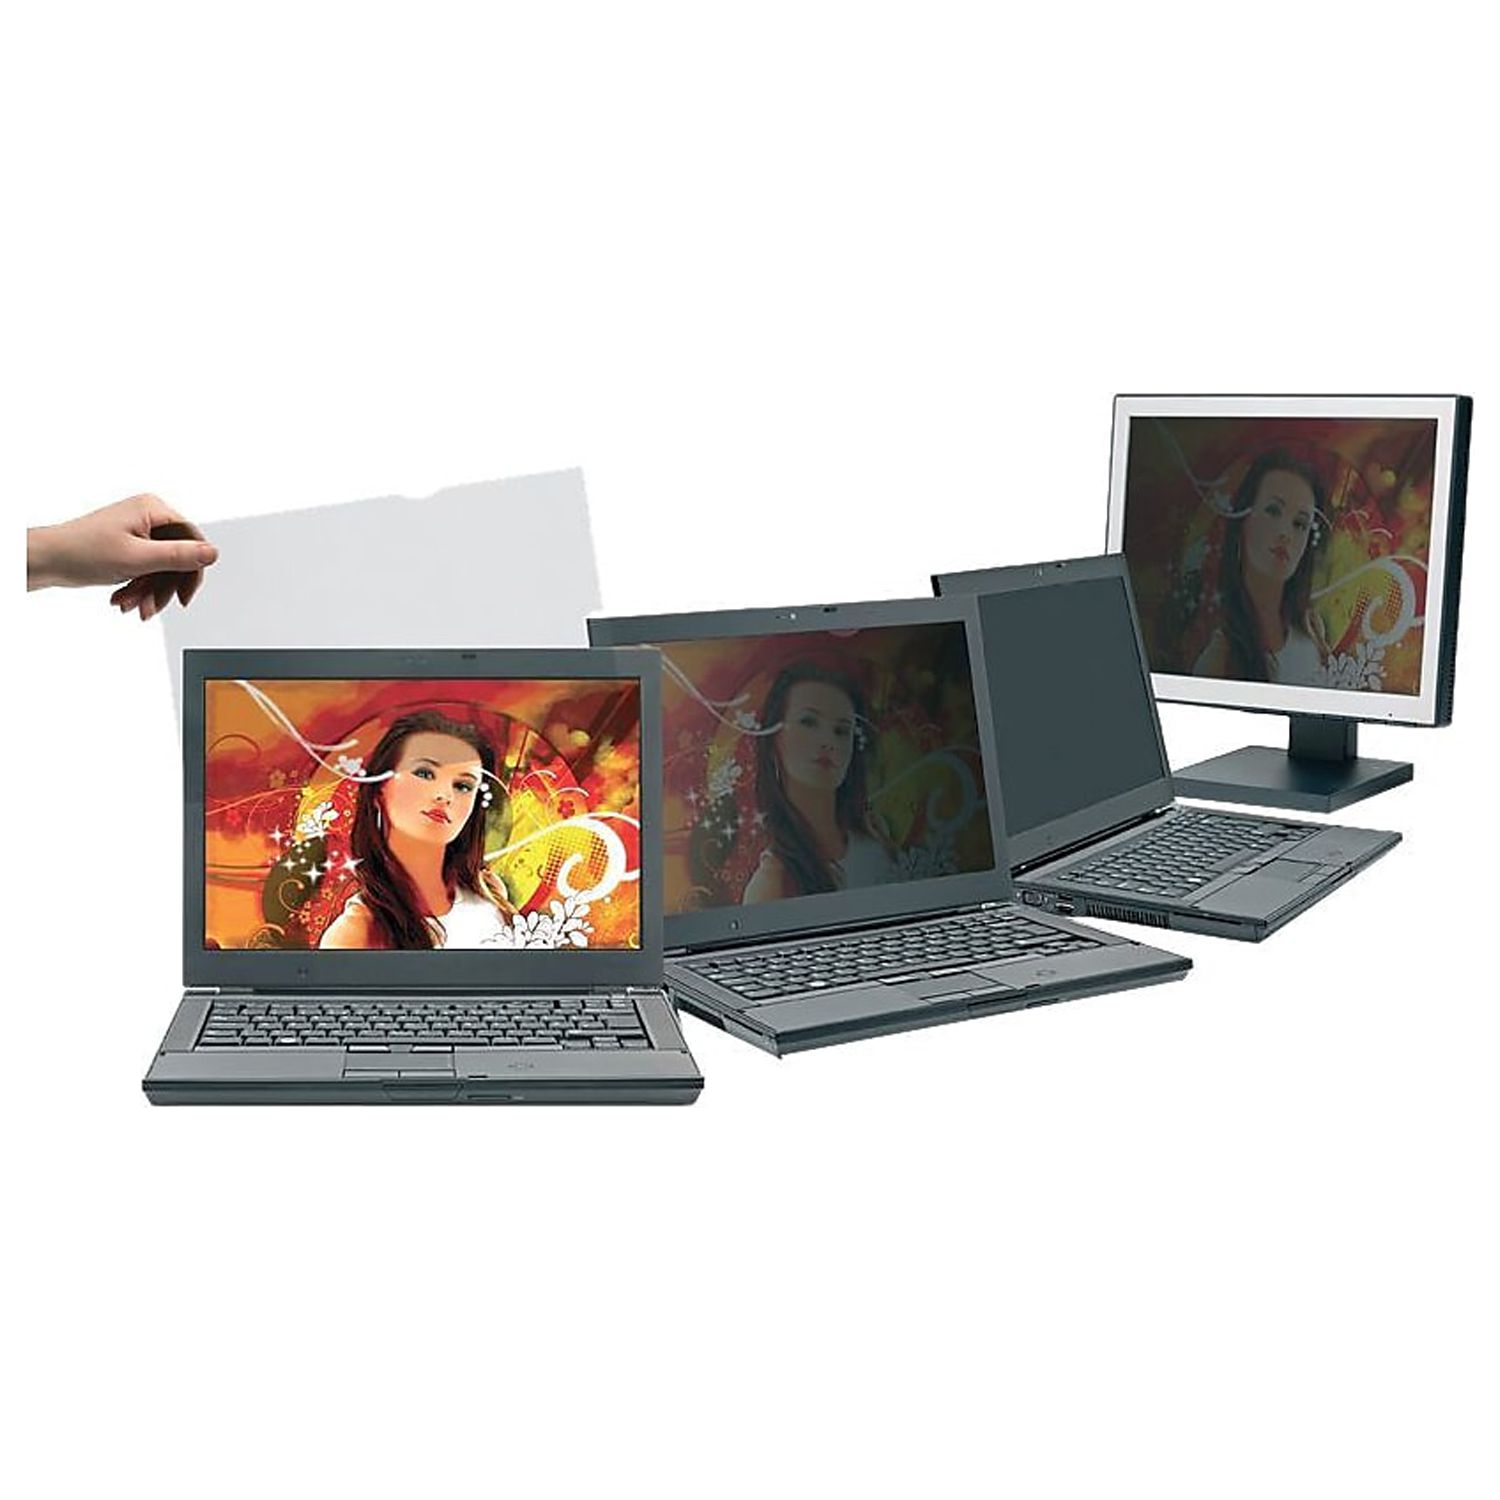 V7 19.0" Widescreen Privacy Frameless Filters for Desktop Monitors - image 1 of 2